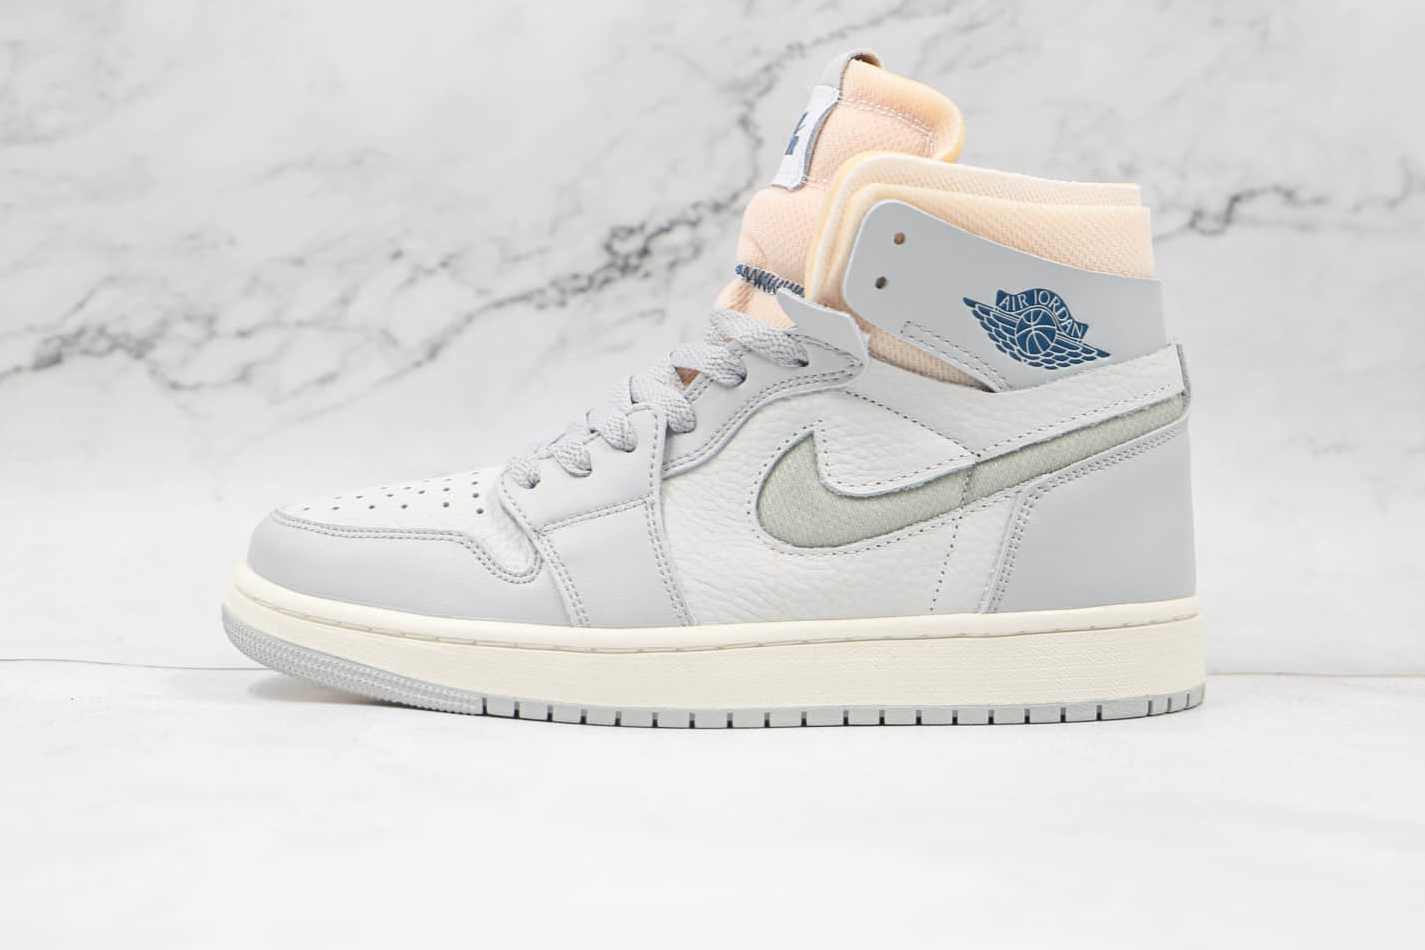 Air Jordan 1 Zoom Comfort 'London' DH4268-001 - Iconic Style with Enhanced Comfort